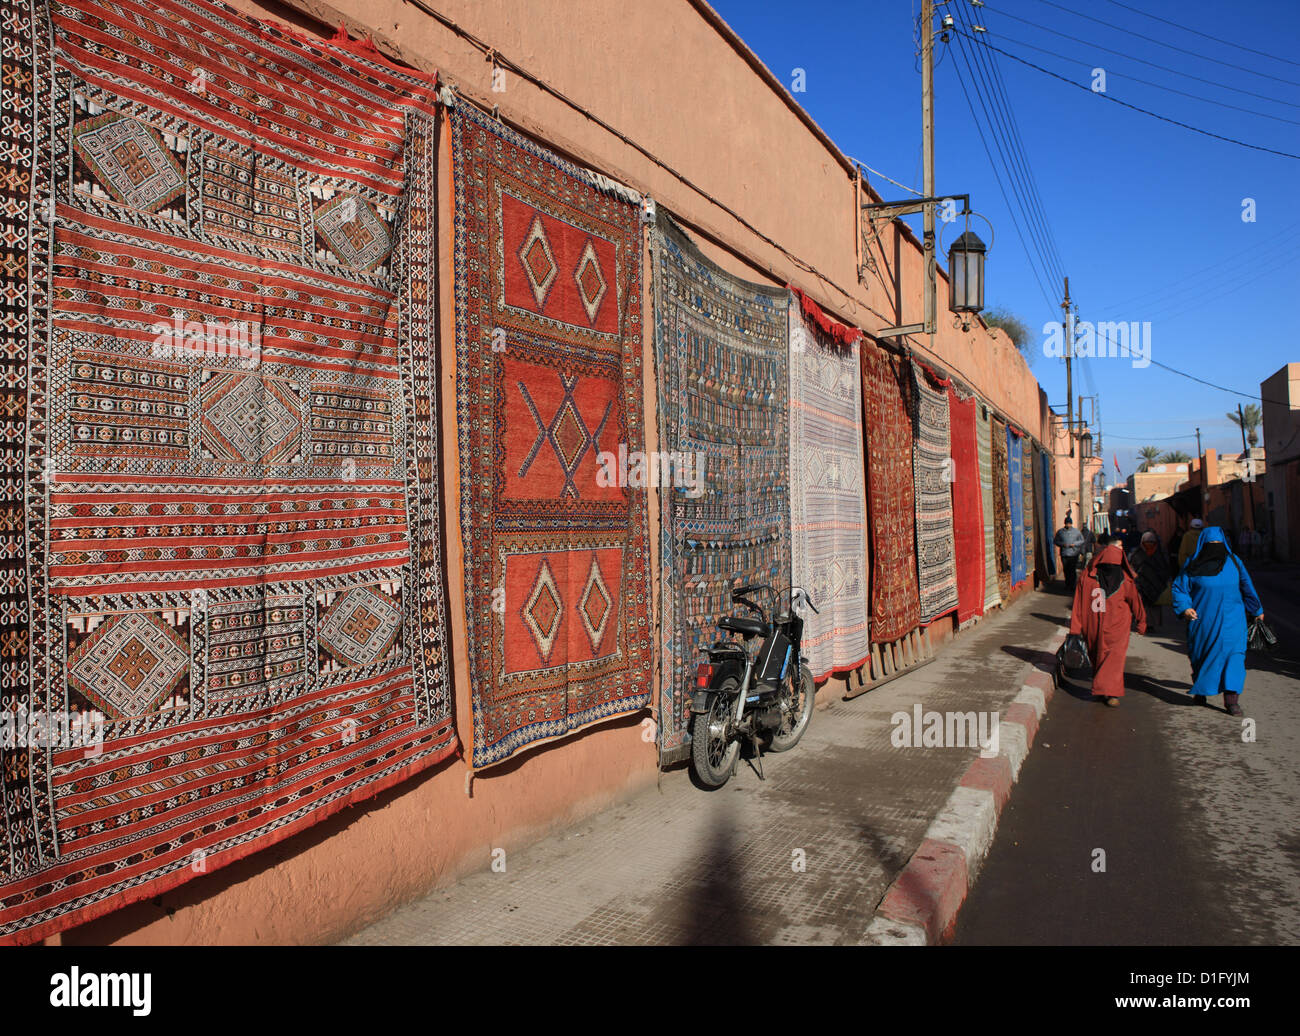 Carpets for sale in the street, Marrakech, Morocco, North Africa, Africa Stock Photo